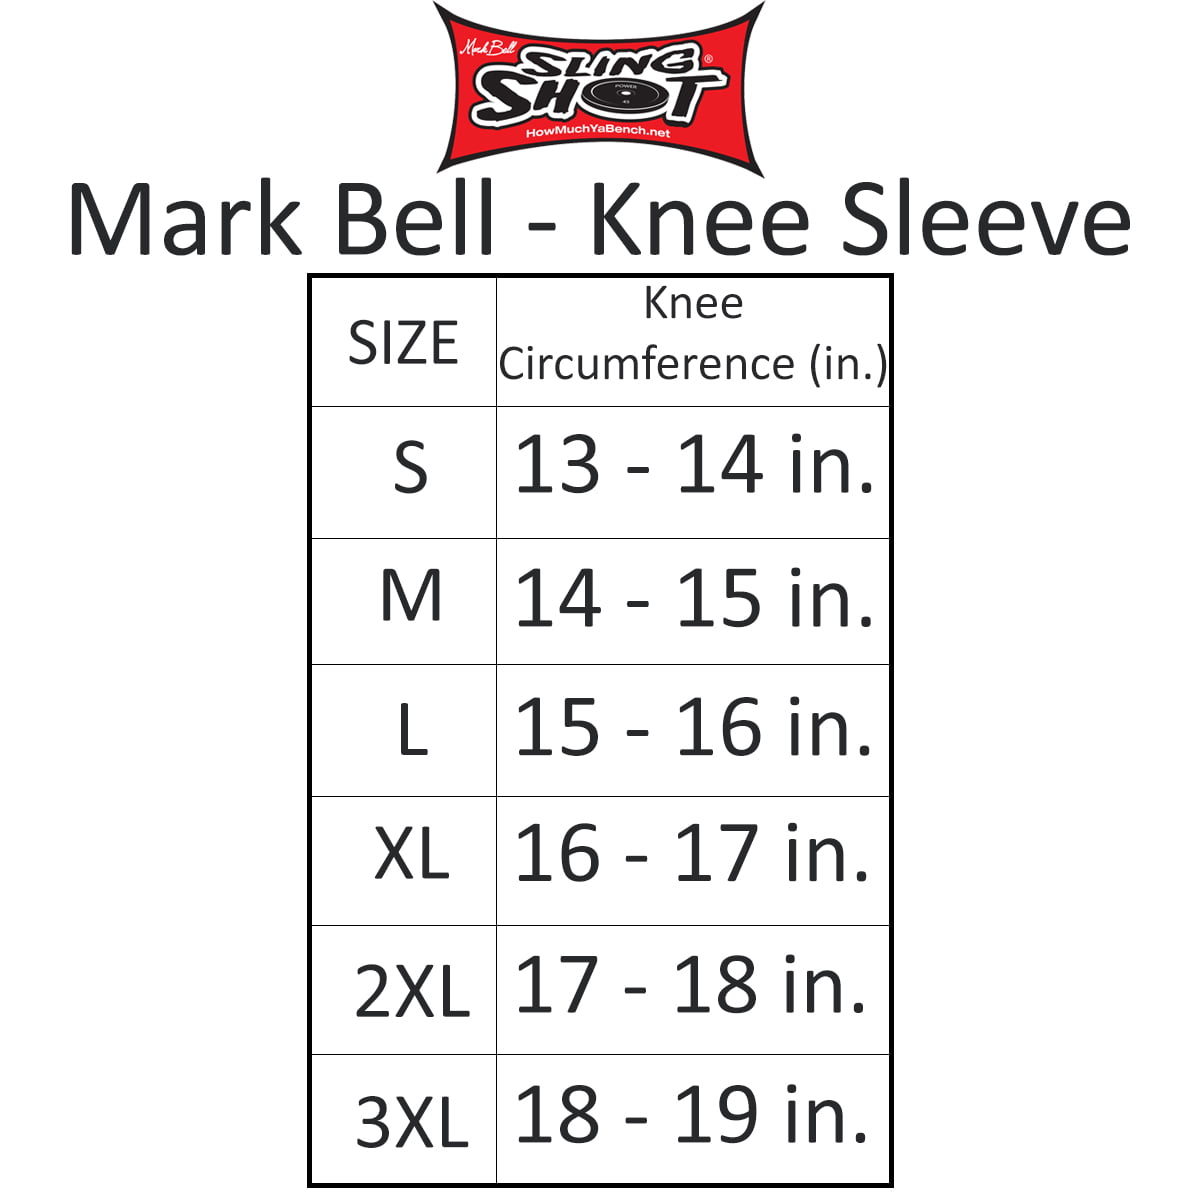 Black Sling Shot Knee Sleeves 2.0 by Mark Bell 7mm thick neoprene compression 